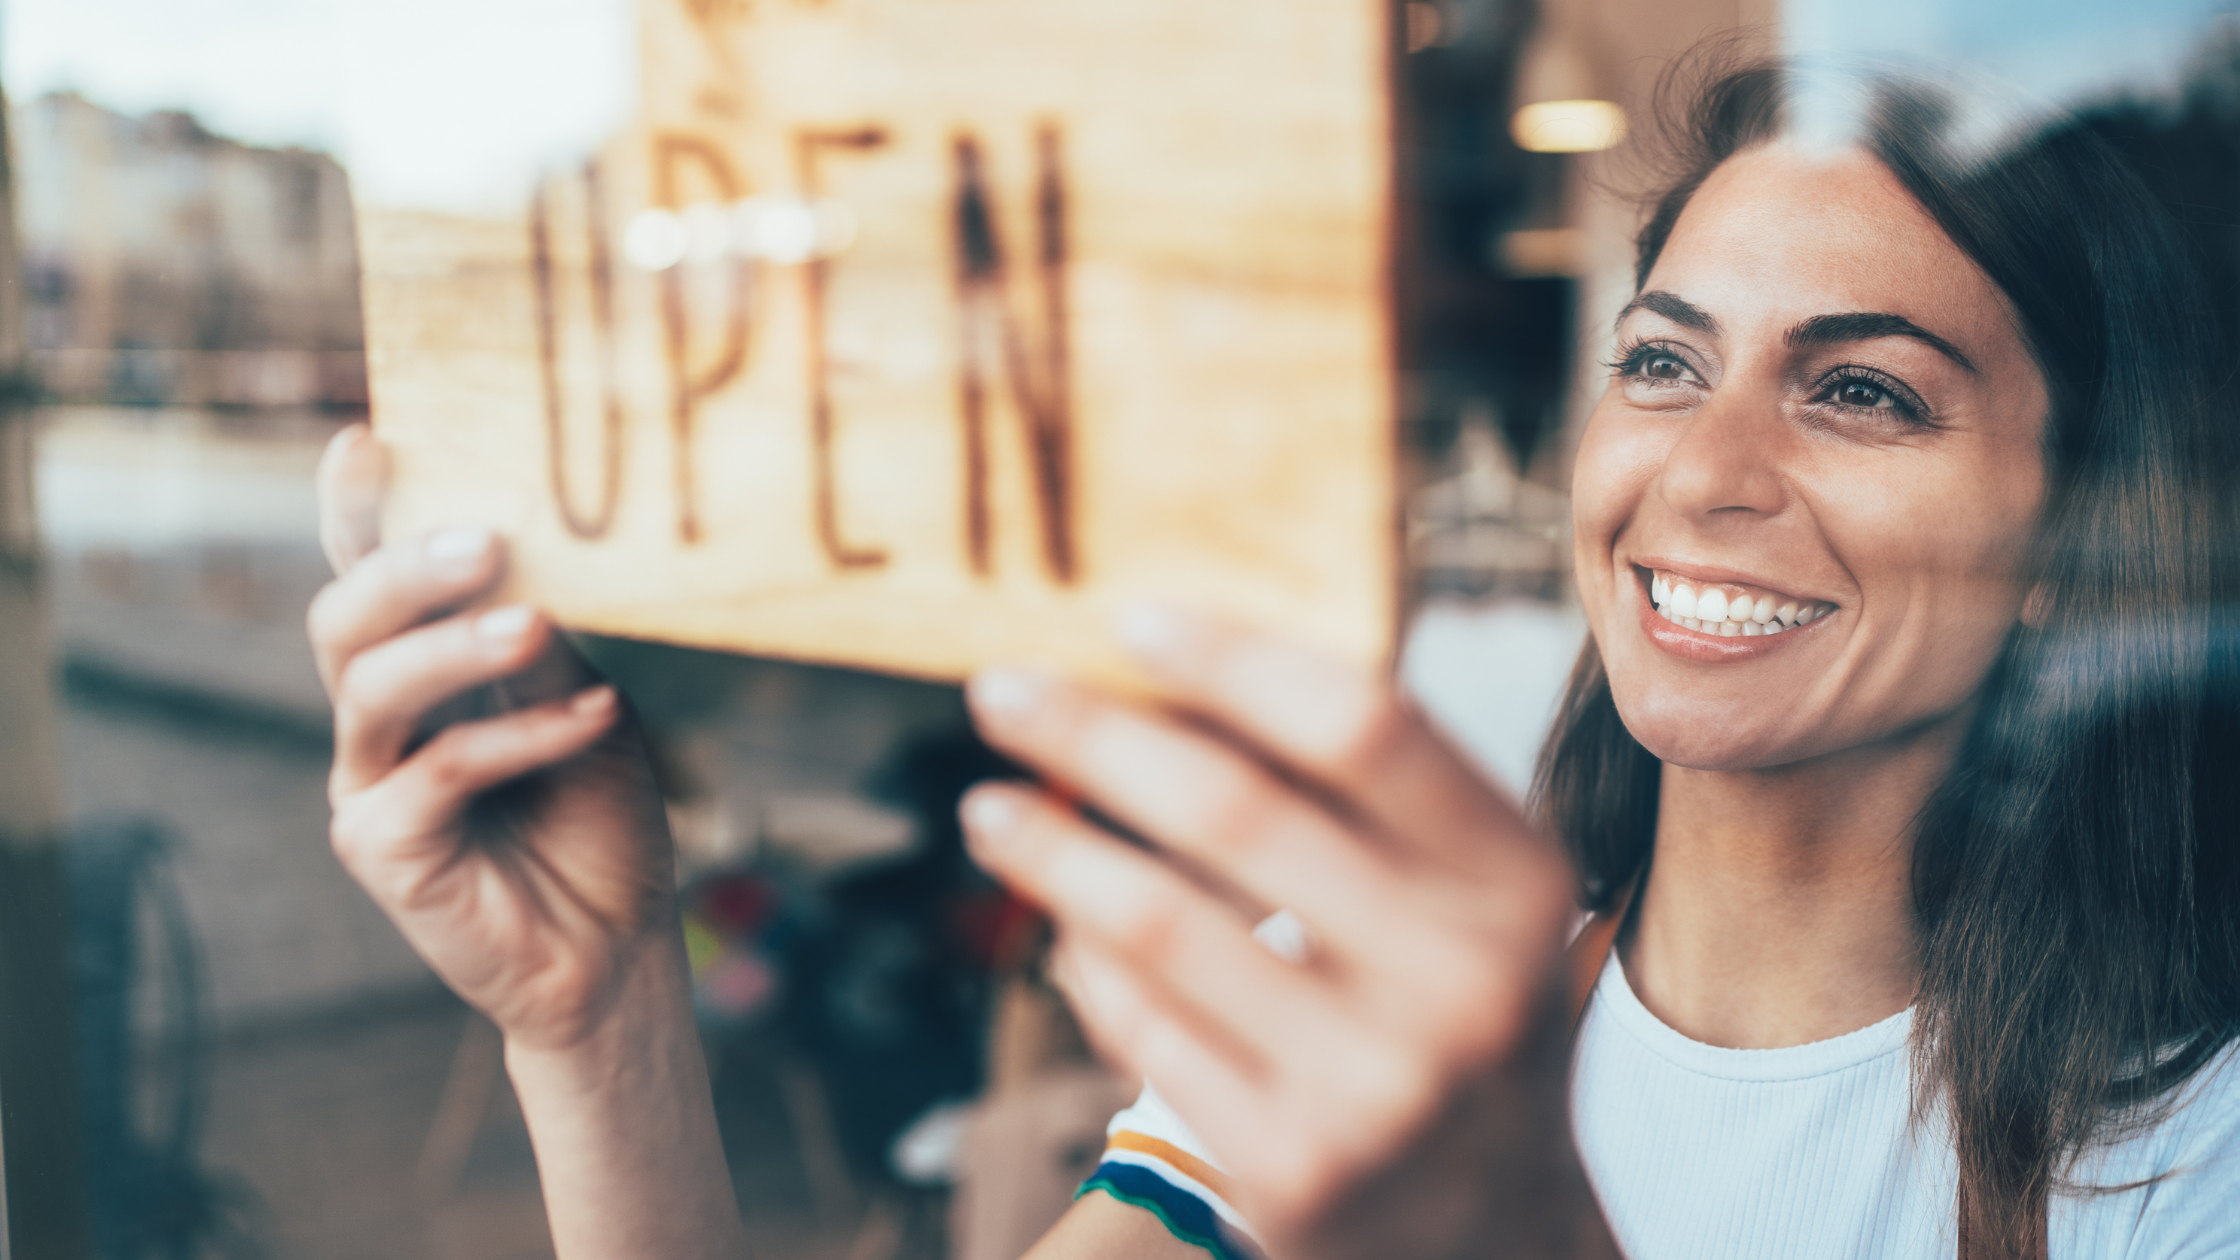 A Step-by-Step Guide to Setting Up a Sole Proprietorship | Woman opening her business